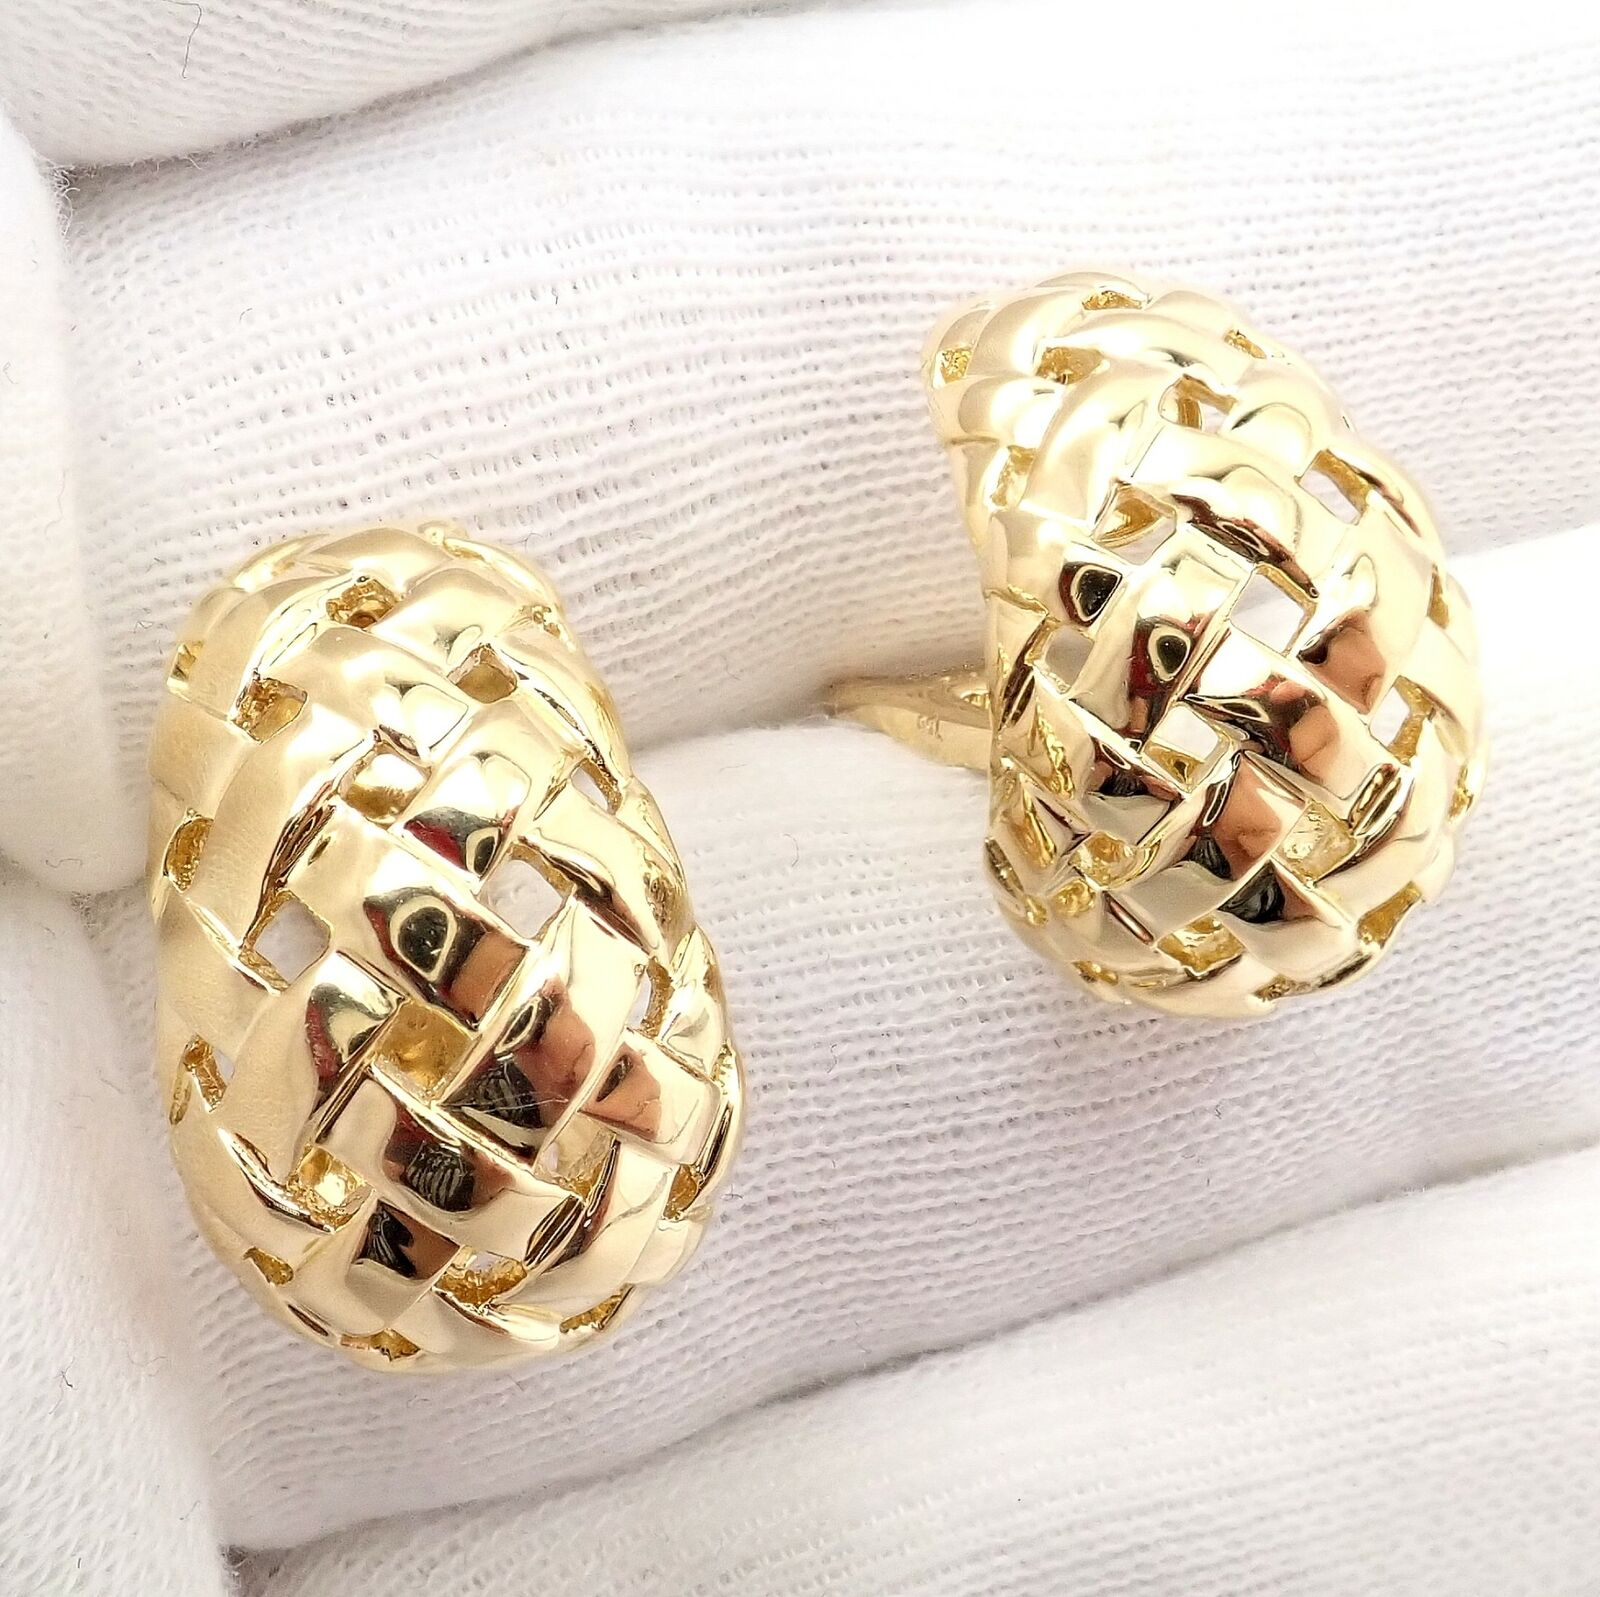 Tiffany & Co. Jewelry & Watches:Fine Jewelry:Earrings Rare! Authentic Tiffany & Co 18k Yellow Gold Vannerie Basket Weave Earrings 1989